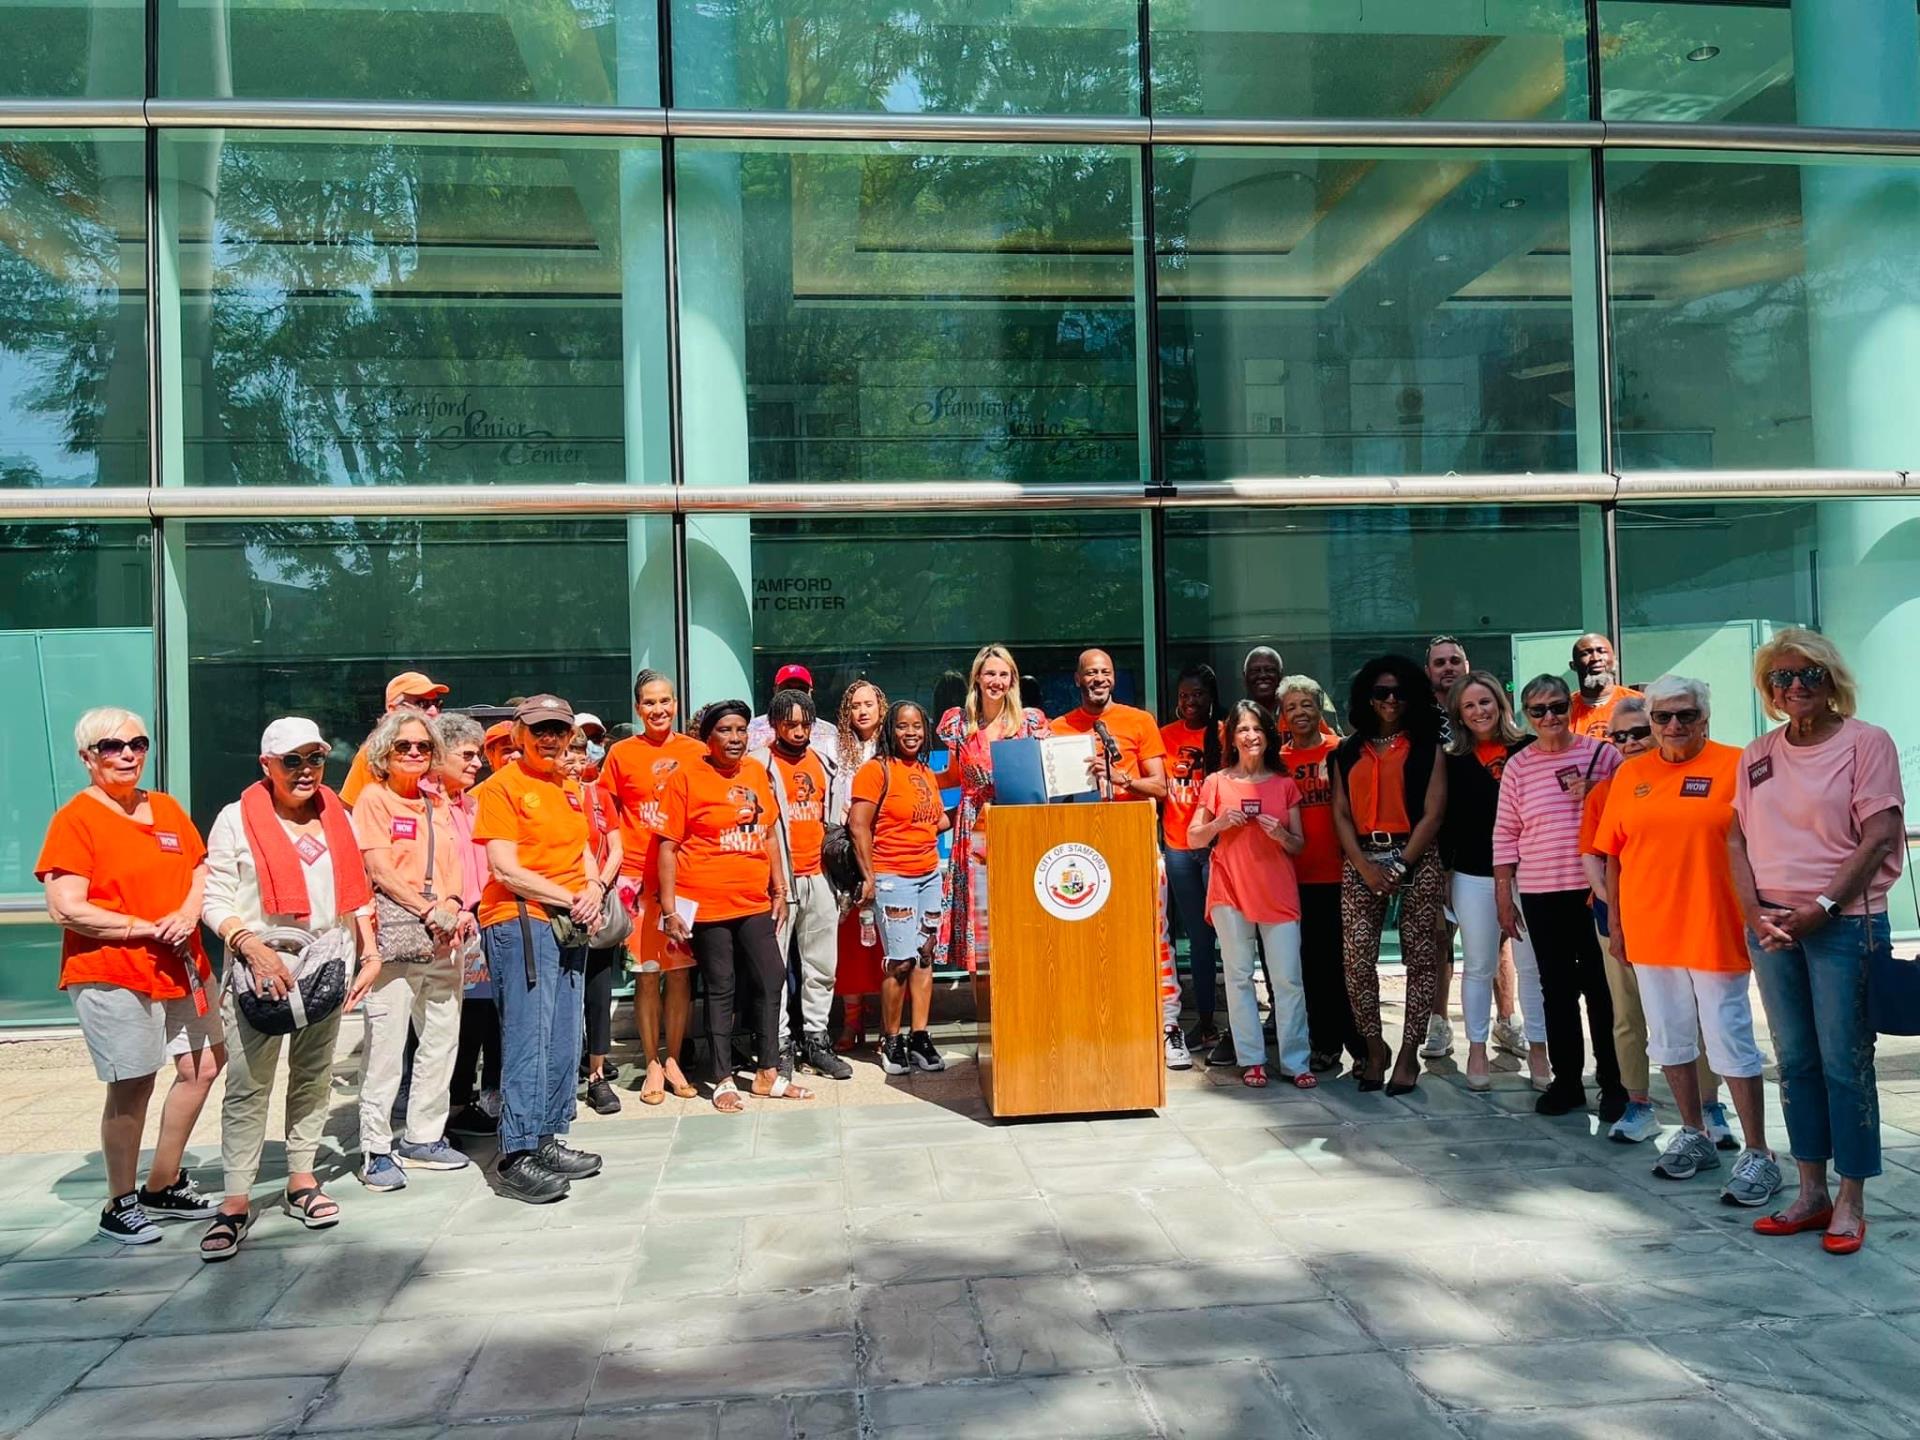 Mayor Simmons presents a proclamation on Gun violence awareness day. She is surrounded by activists in orange